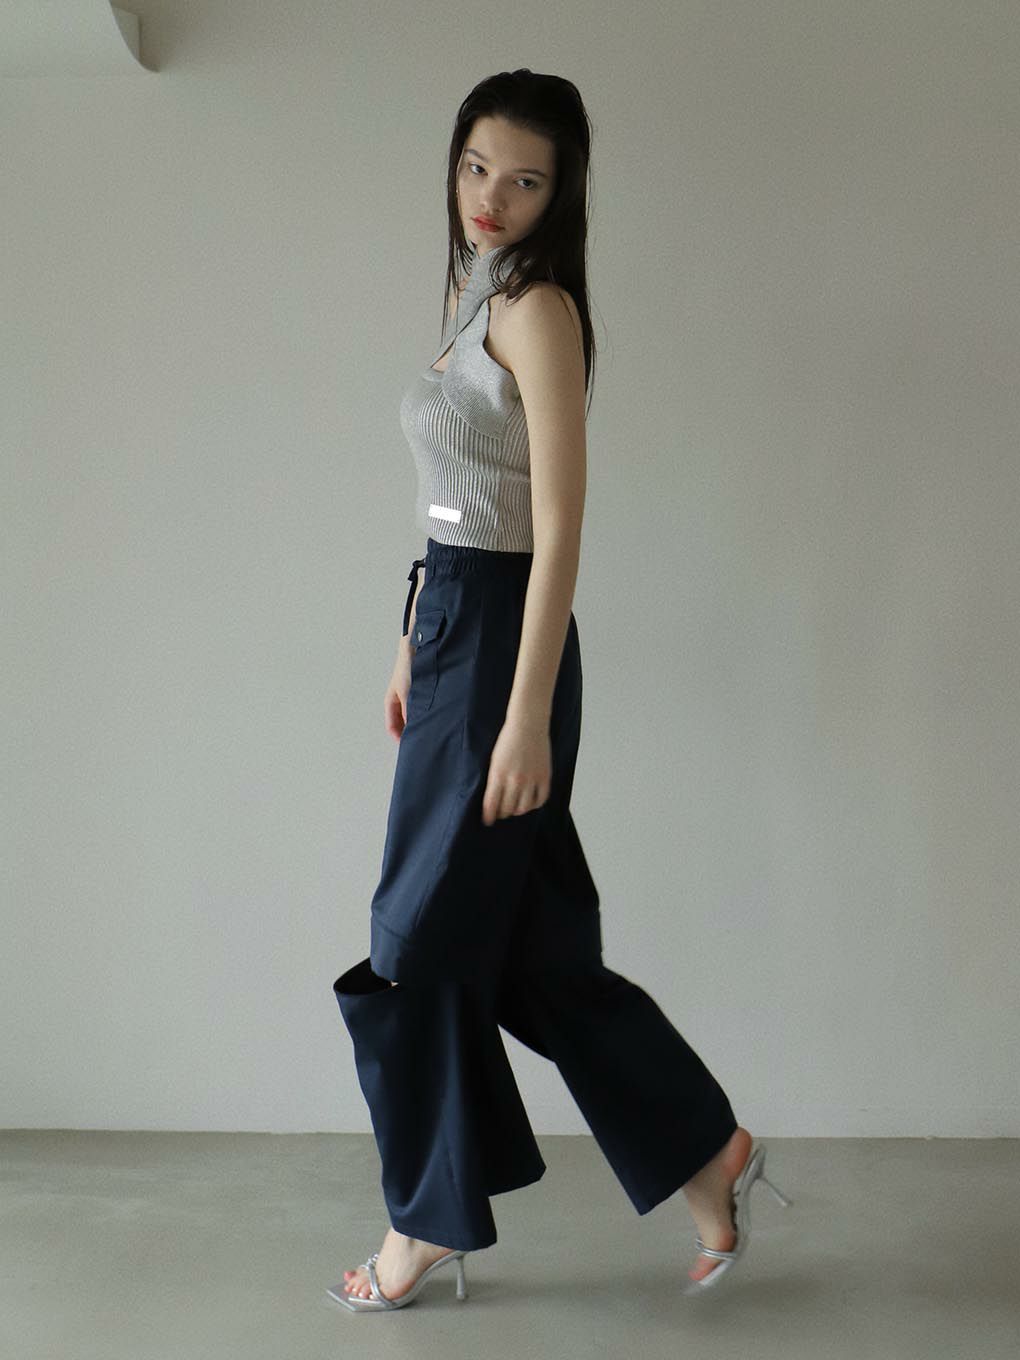 May You Be Women's Super Stretch Pull-On Millennium Ankle Pants